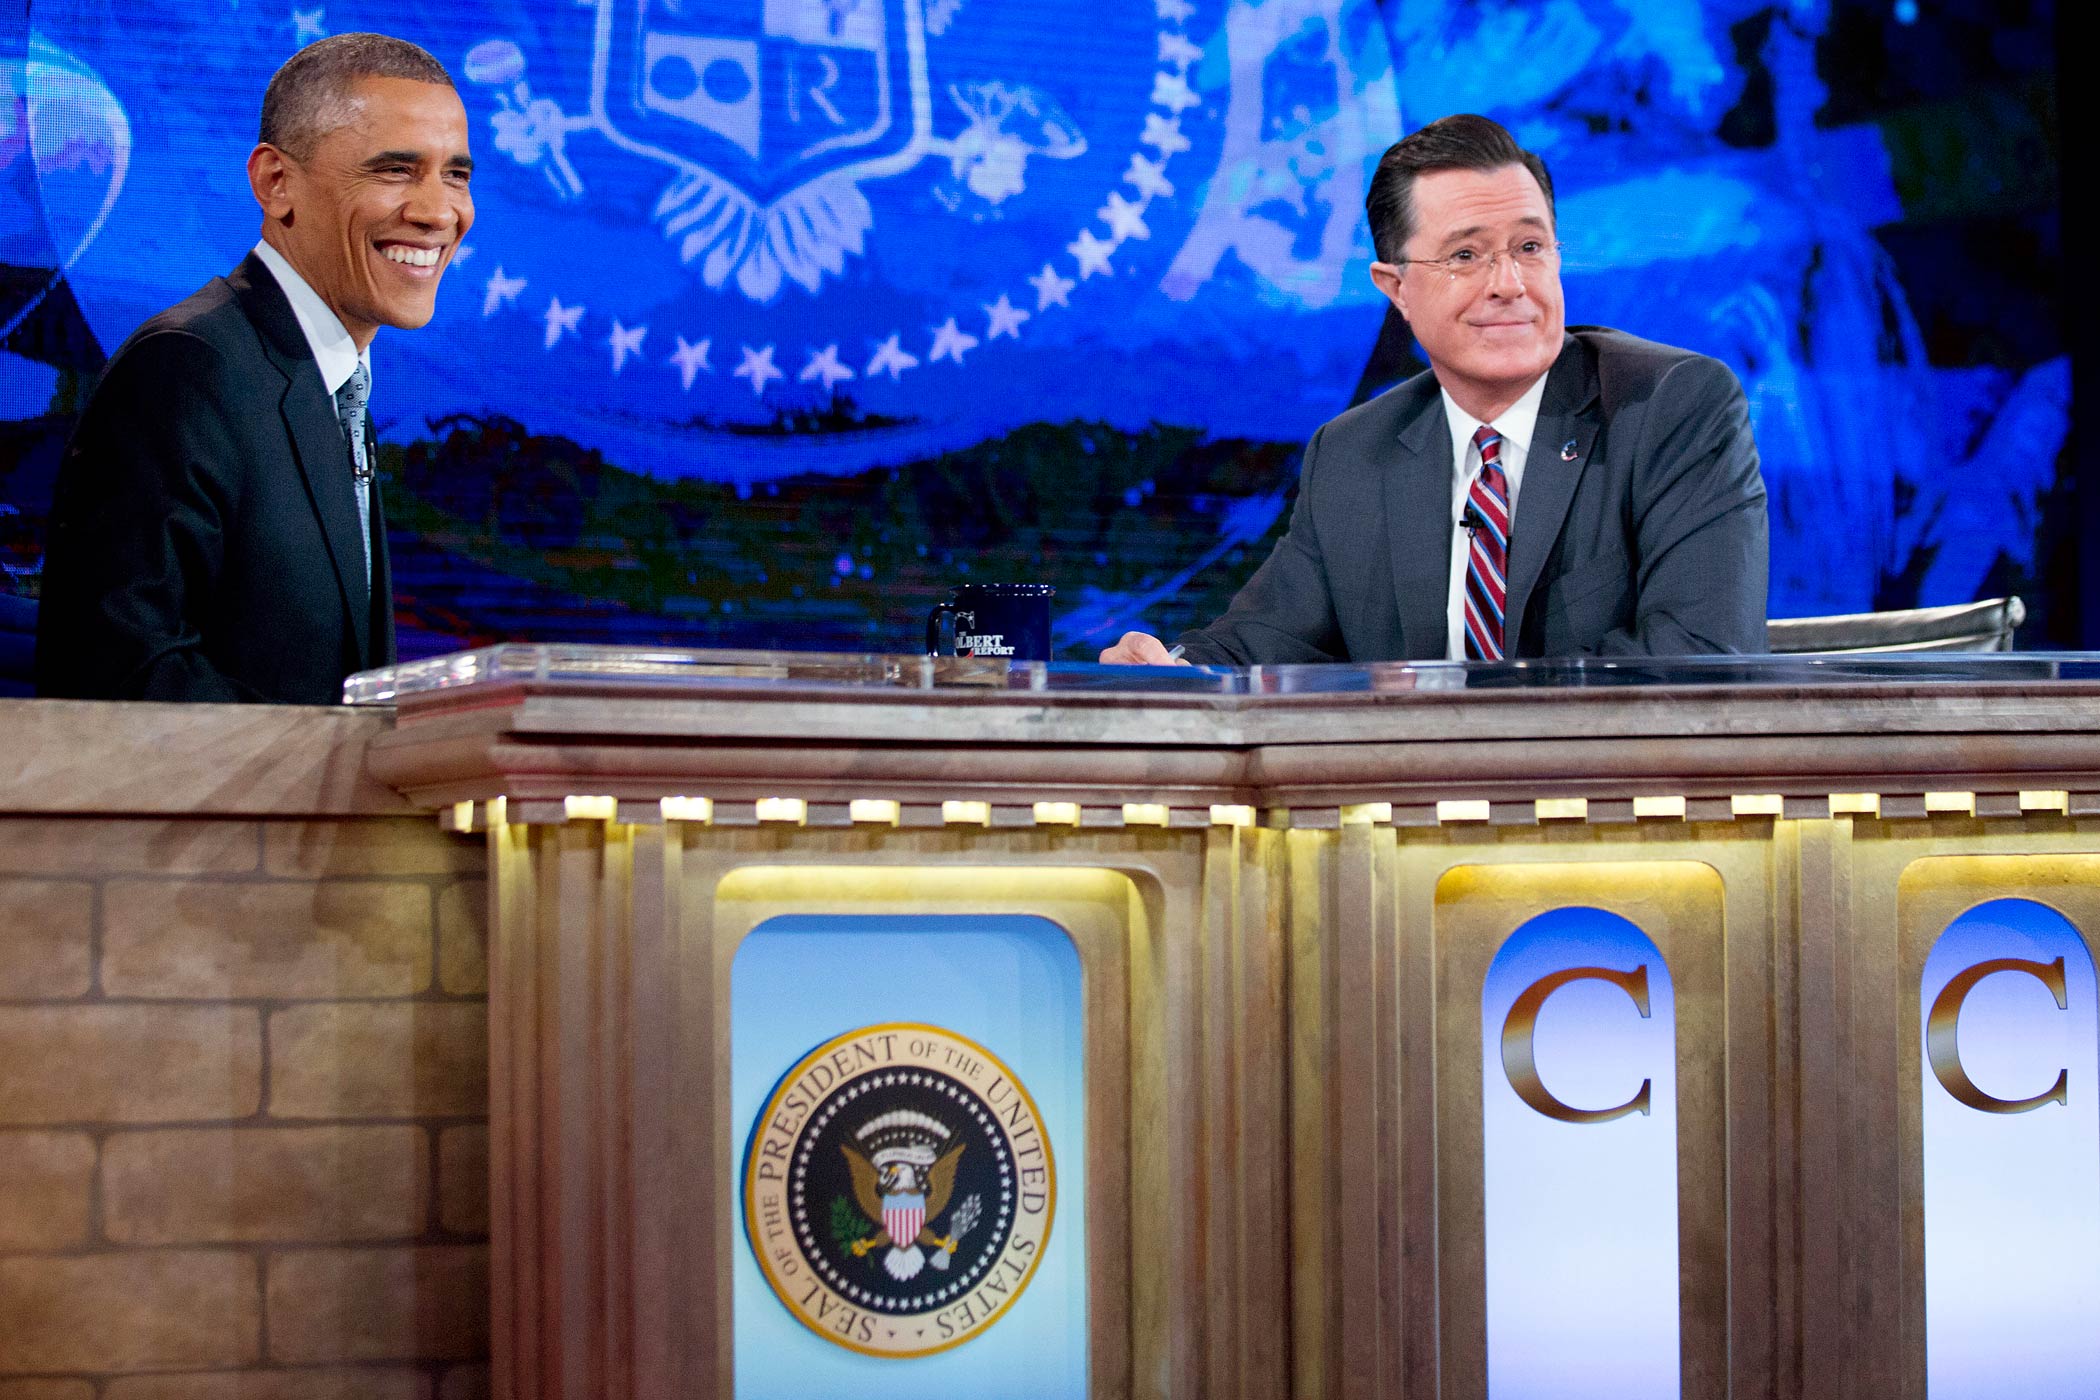 President Obama Tapes An Interview For The Colbert Report with Stephen Colbert